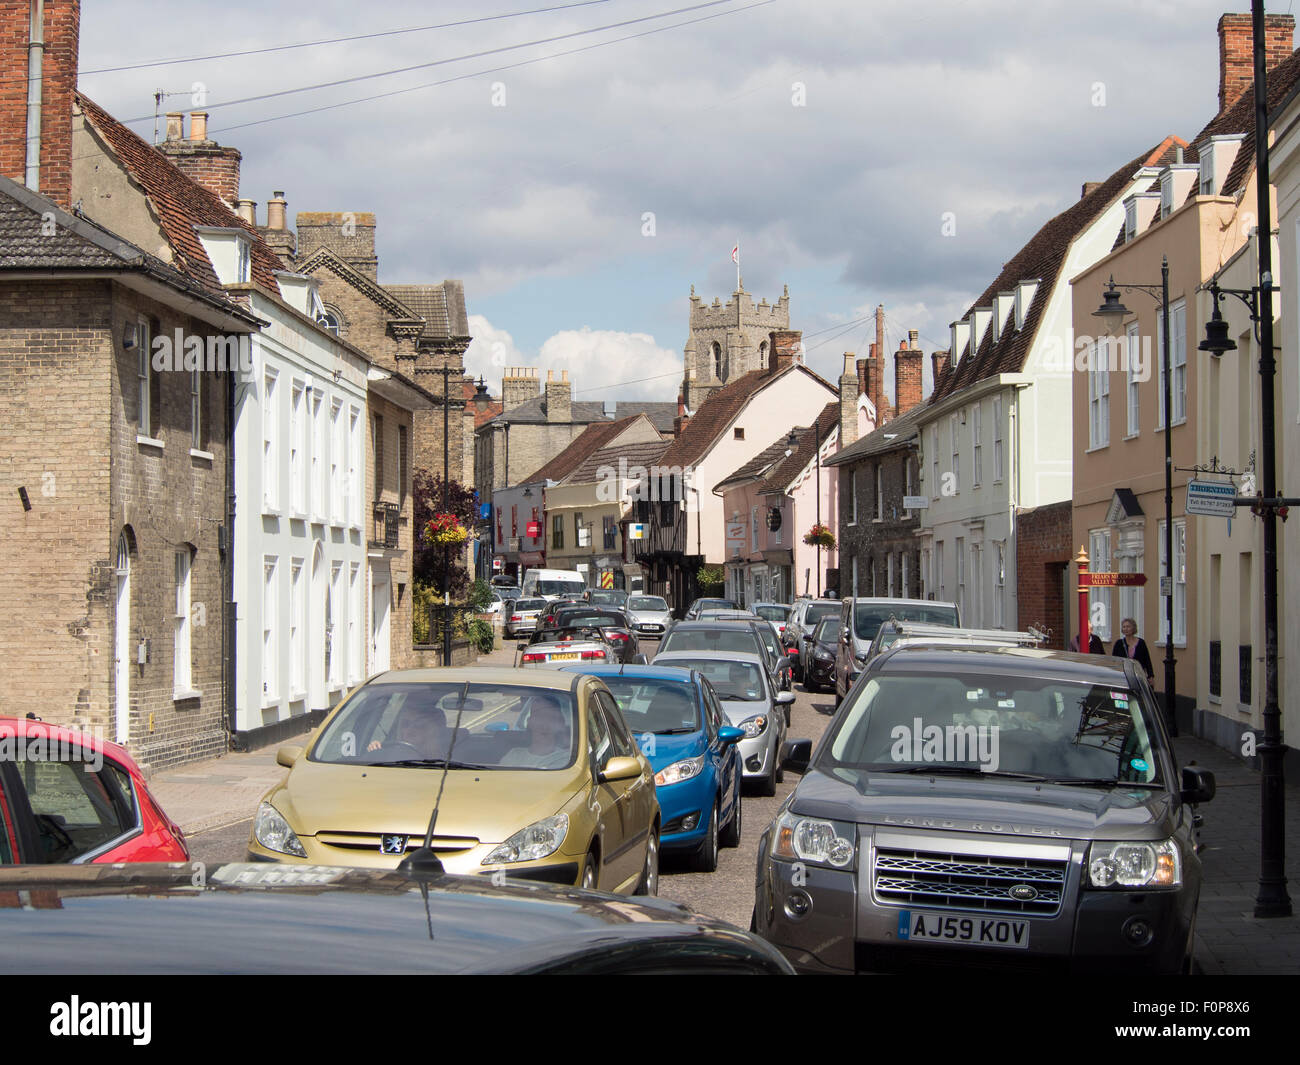 Urban crawl: traffic congestion on the streets of a market town in England Stock Photo